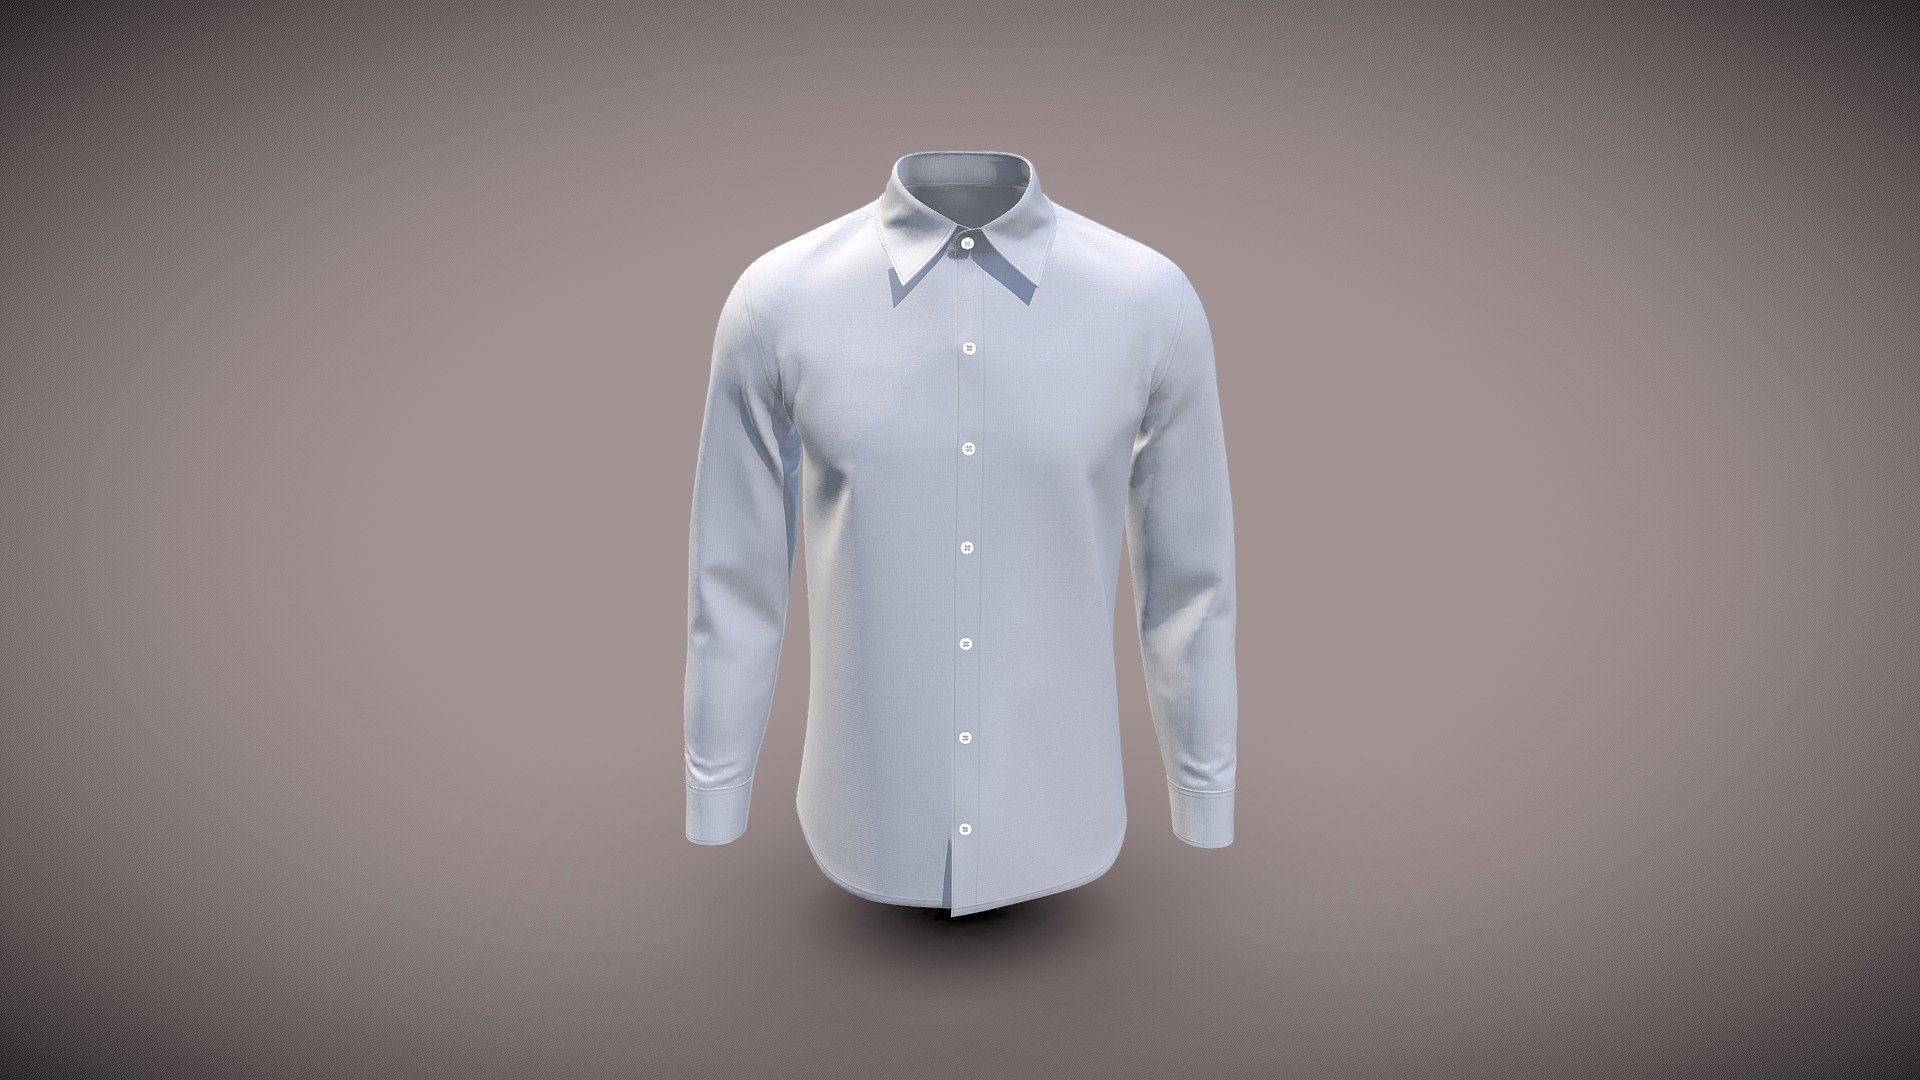 Cloth Title = White Men Slim Fit Casual Shirt Design 

SKU = DG100072 

Category = Men 

Product Type = Shirt 

Cloth Length = Regular 

Body Fit = Slim Fit 

Occasion = Casual  

Sleeve Style = Long Sleeve 


Our Services: 

3D Apparel Design. 

OBJ,FBX,GLTF Making with High/Low Poly. 

Fabric Digitalization. 

Mockup making. 

3D Teck Pack. 

Pattern Making. 

2D Illustration. 

Cloth Animation and 360 Spin Video. 


Contact us:- 

Email: info@digitalfashionwear.com 

Website: https://digitalfashionwear.com 


We designed all the types of cloth specially focused on product visualization, e-commerce, fitting, and production. 

We will design: 

T-shirts 

Polo shirts 

Hoodies 

Sweatshirt 

Jackets 

Shirts 

TankTops 

Trousers 

Bras 

Underwear 

Blazer 

Aprons 

Leggings 

and All Fashion items. 





Our goal is to make sure what we provide you, meets your demand 3d model